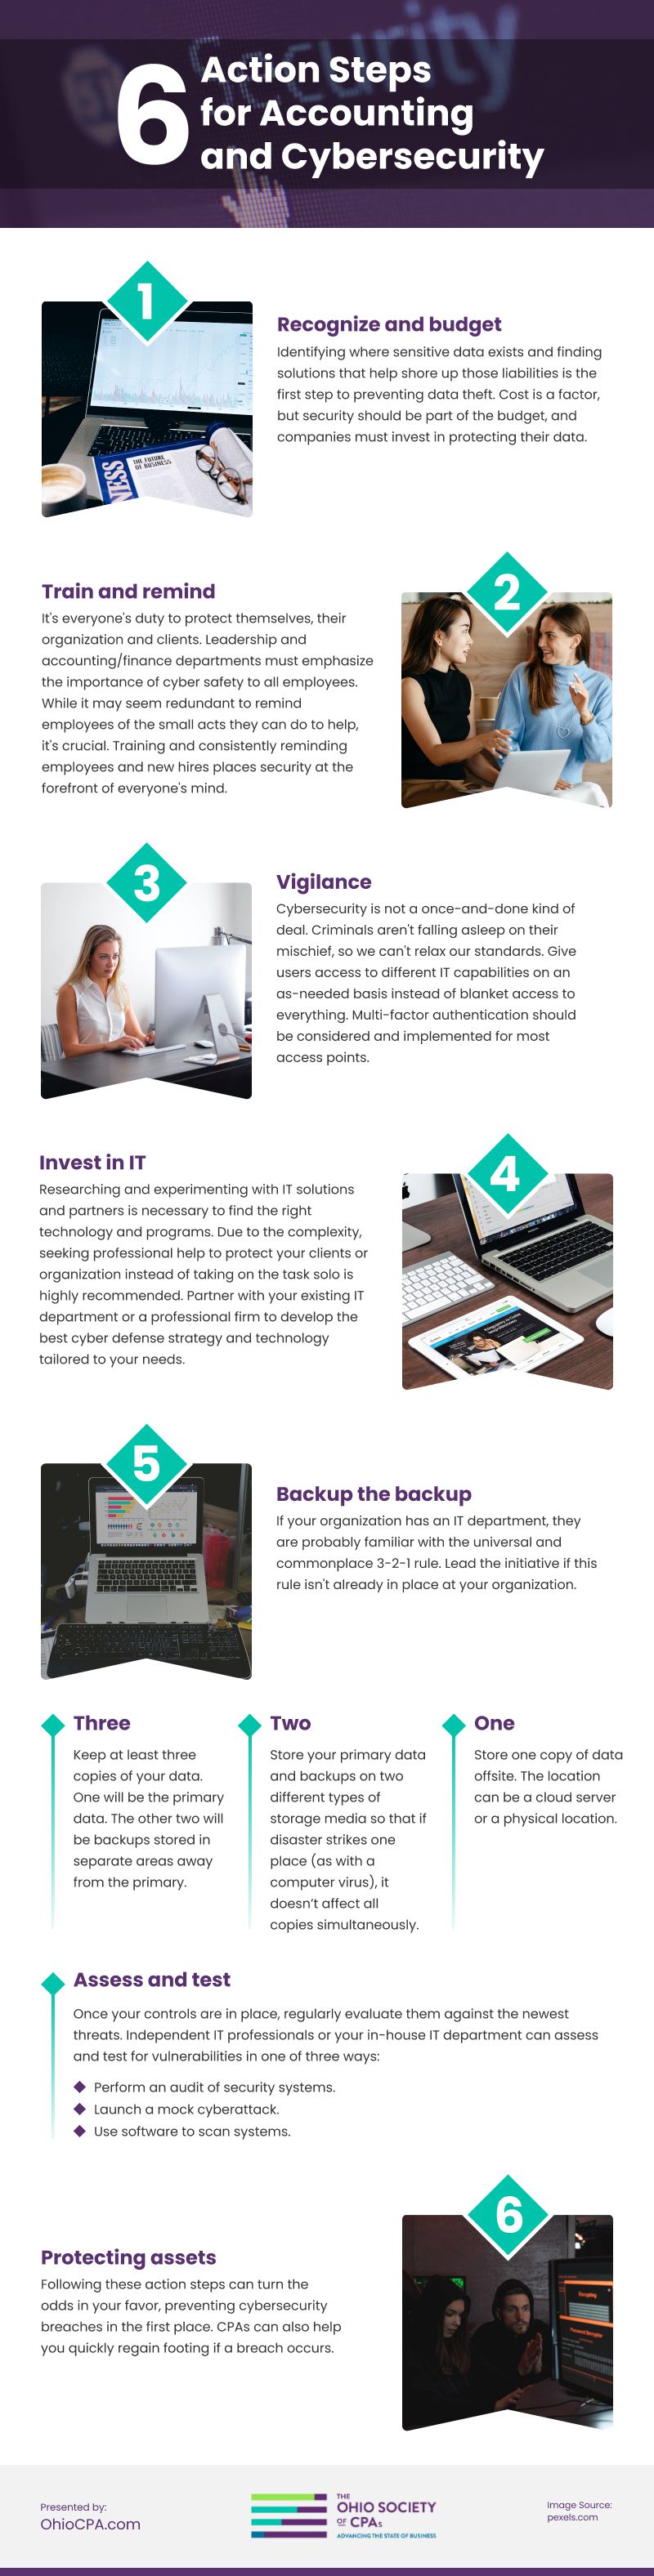 6 Action Steps for Accounting and Cybersecurity Infographic